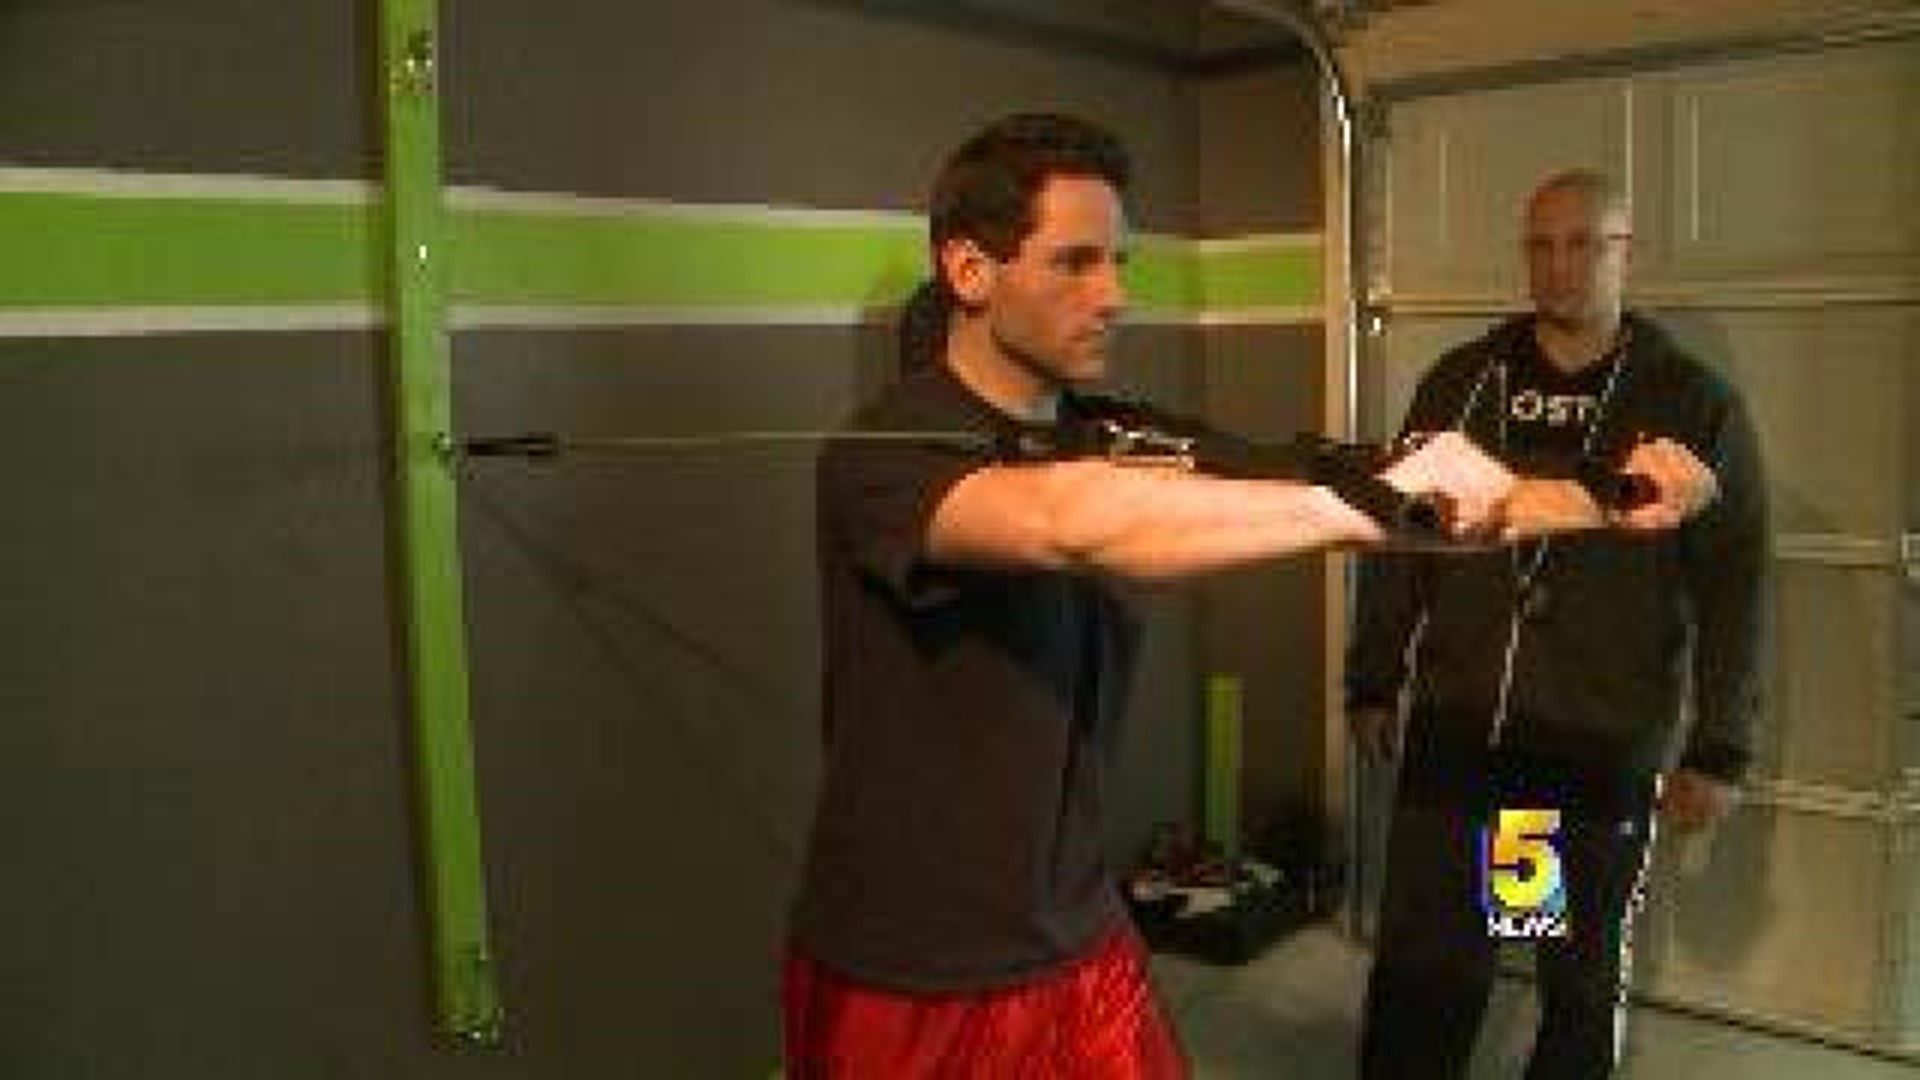 5NEWS Fit: Fitness Assessment